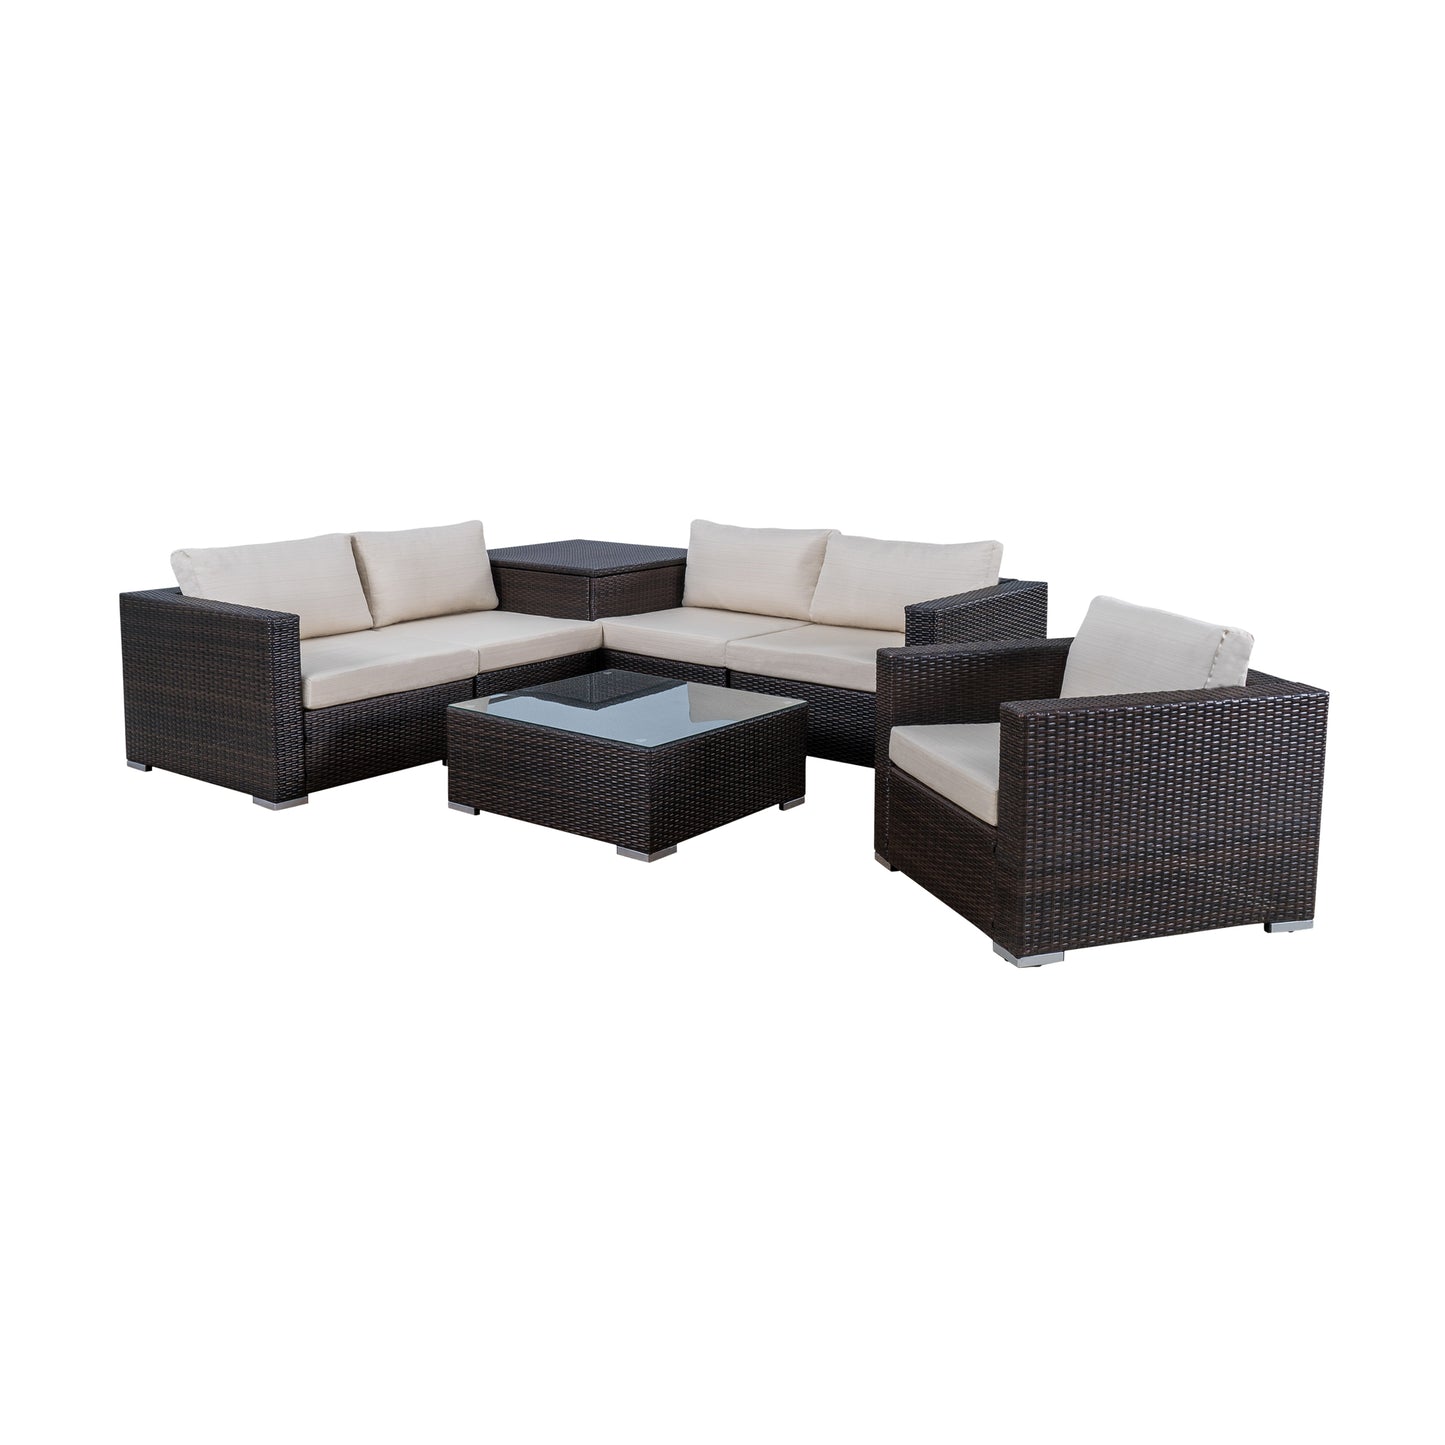 Francisco 7pc Outdoor Sectional Sofa Set w/ Cushions